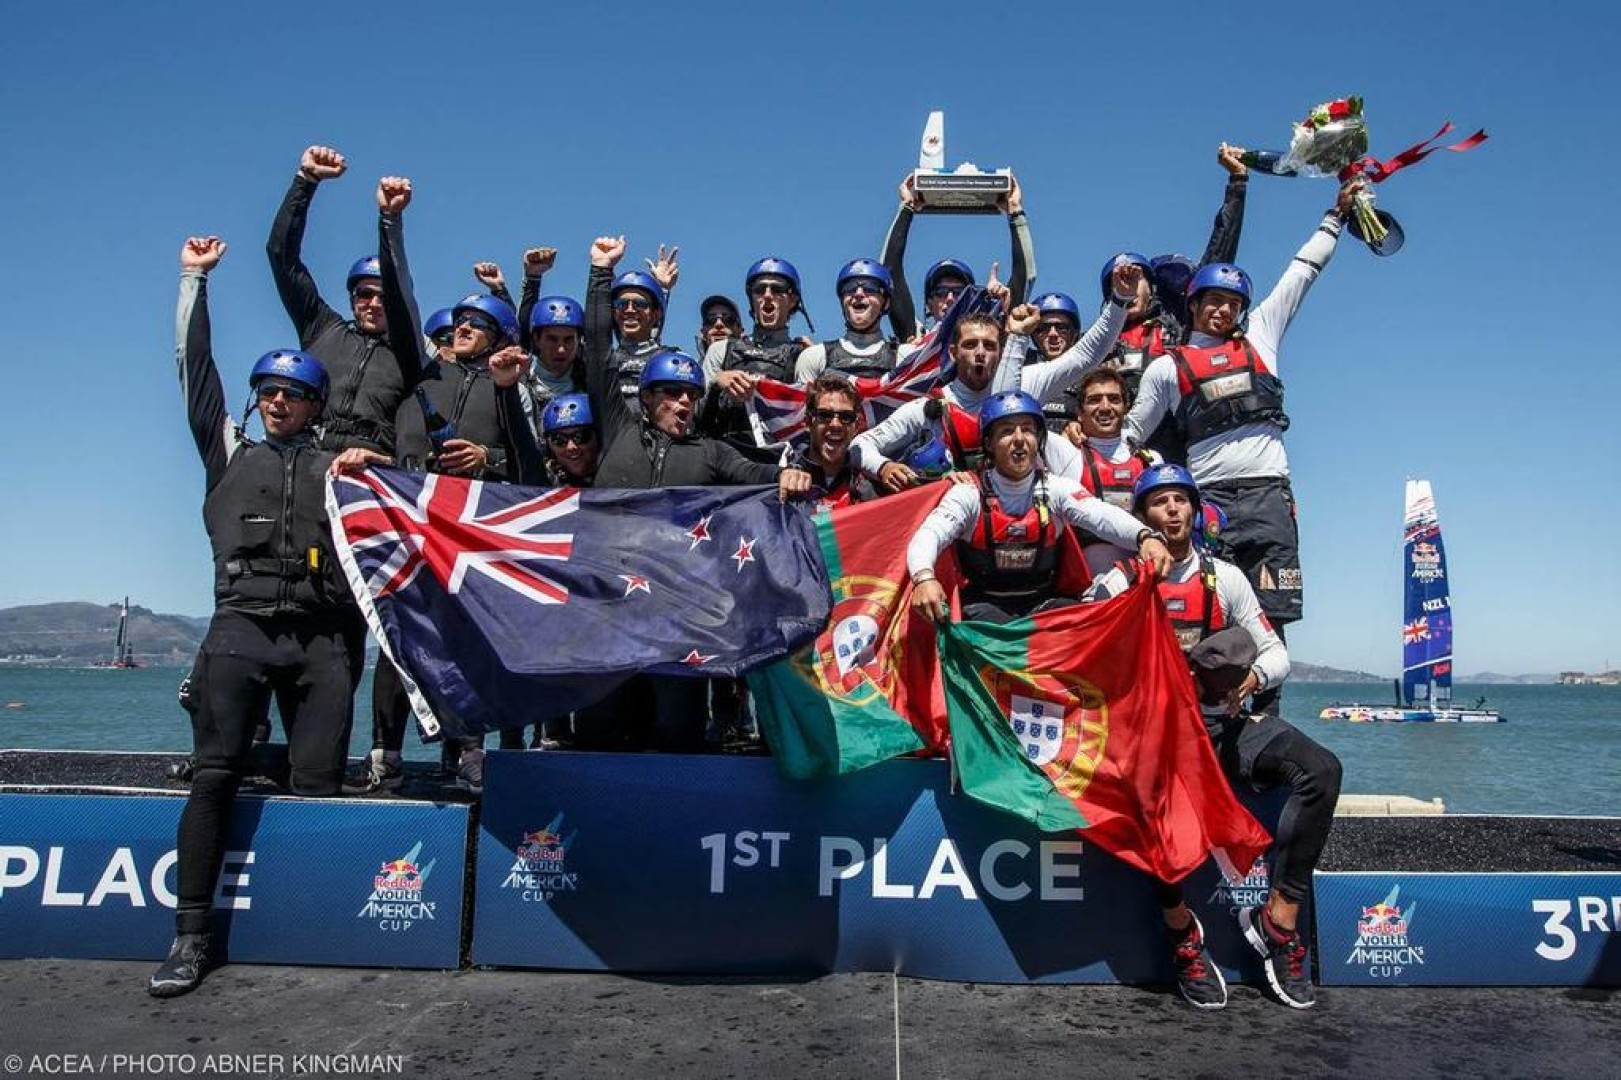 Women's and Youth America's Cup events announced